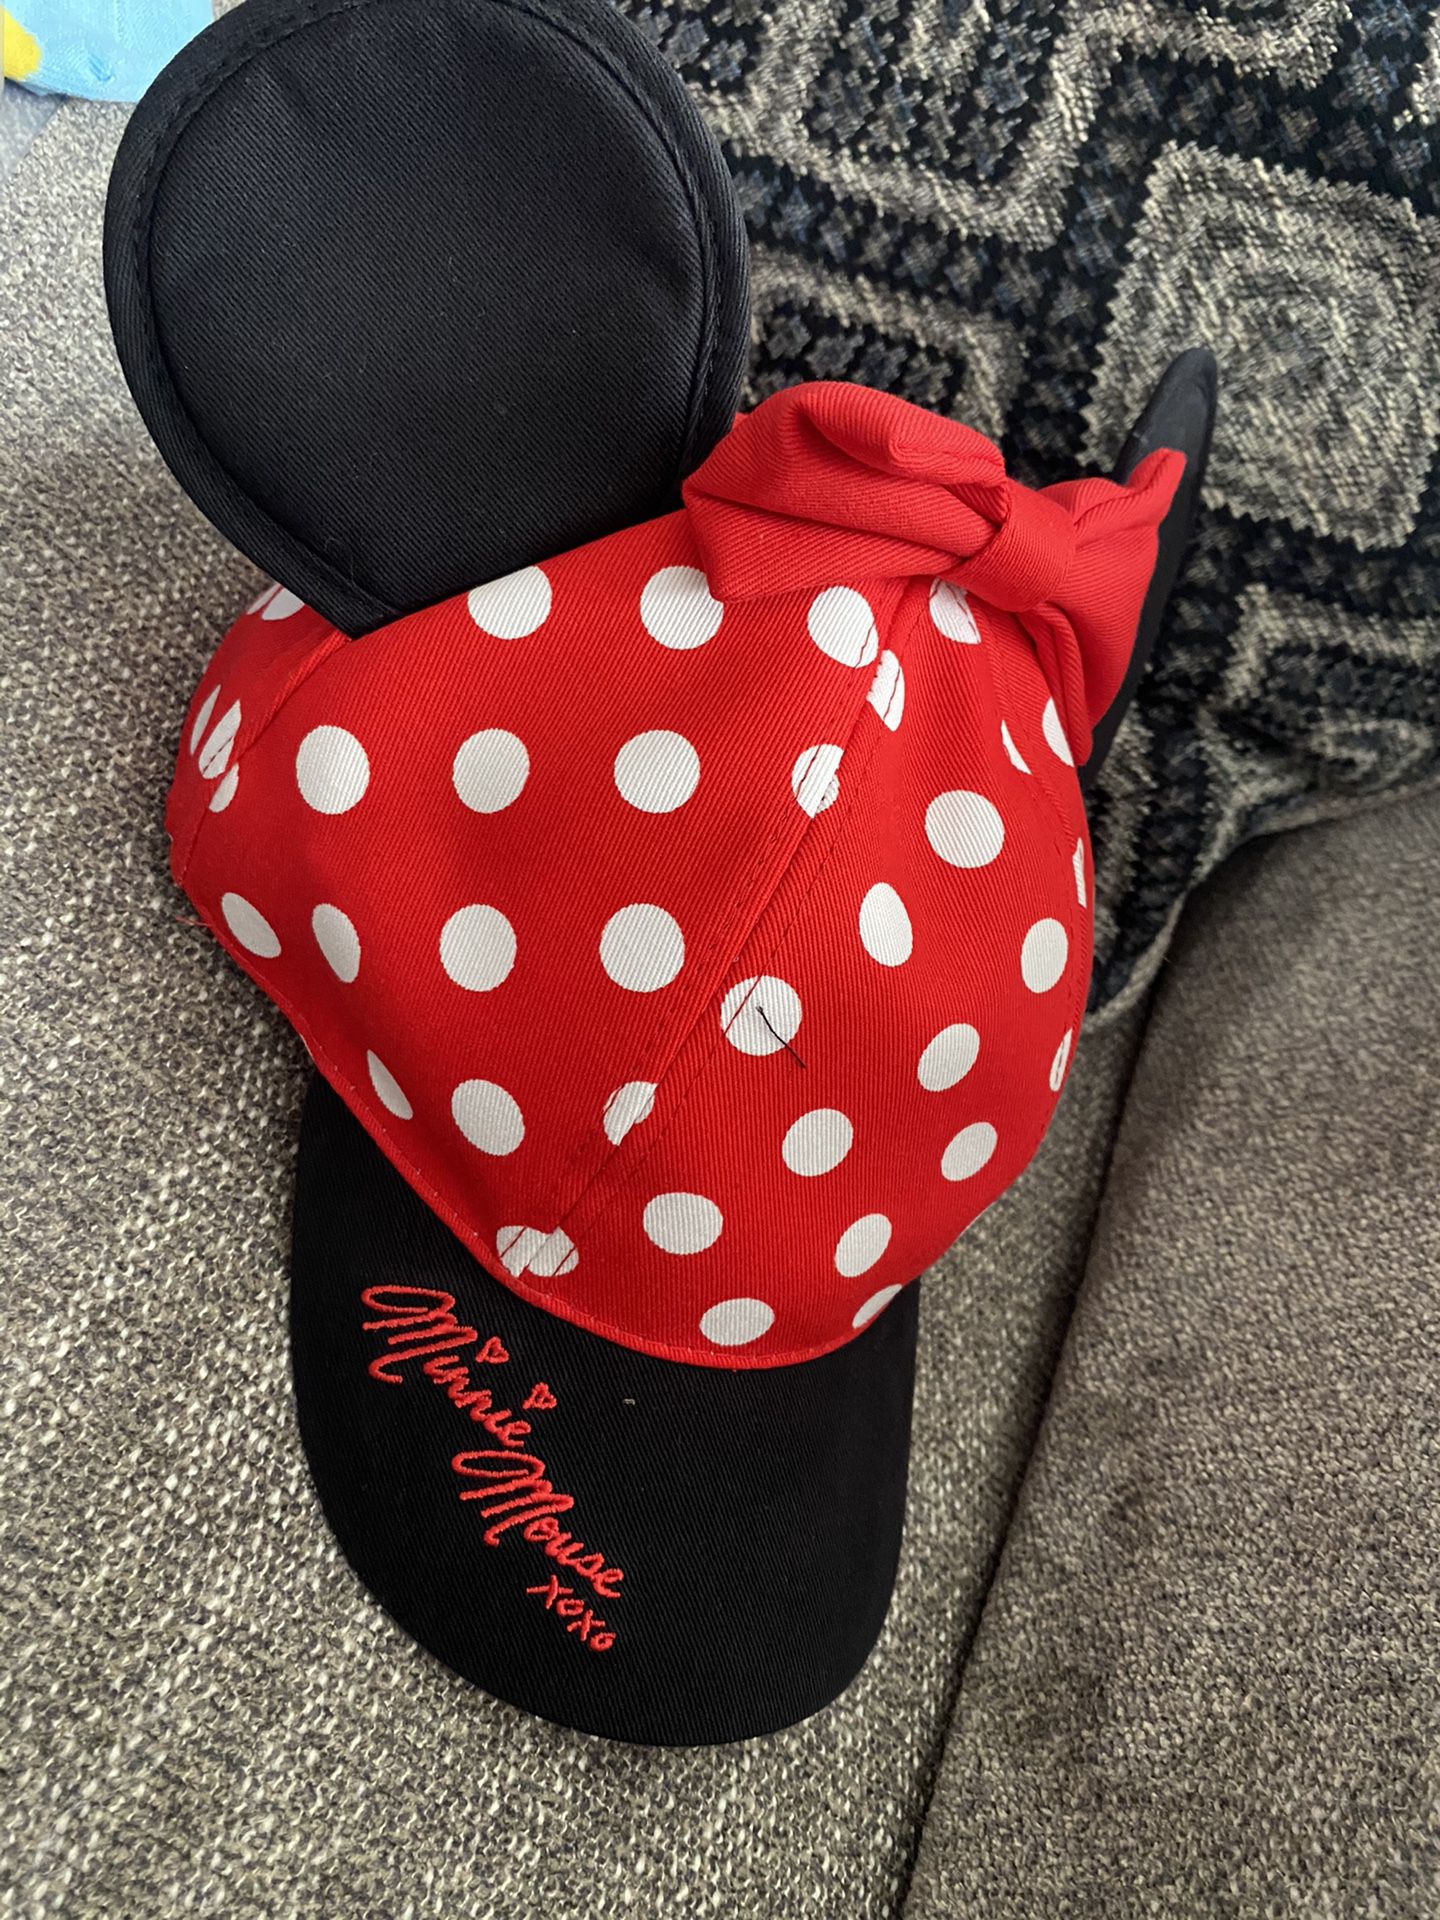 Disney Youth Minnie Mouse Hat